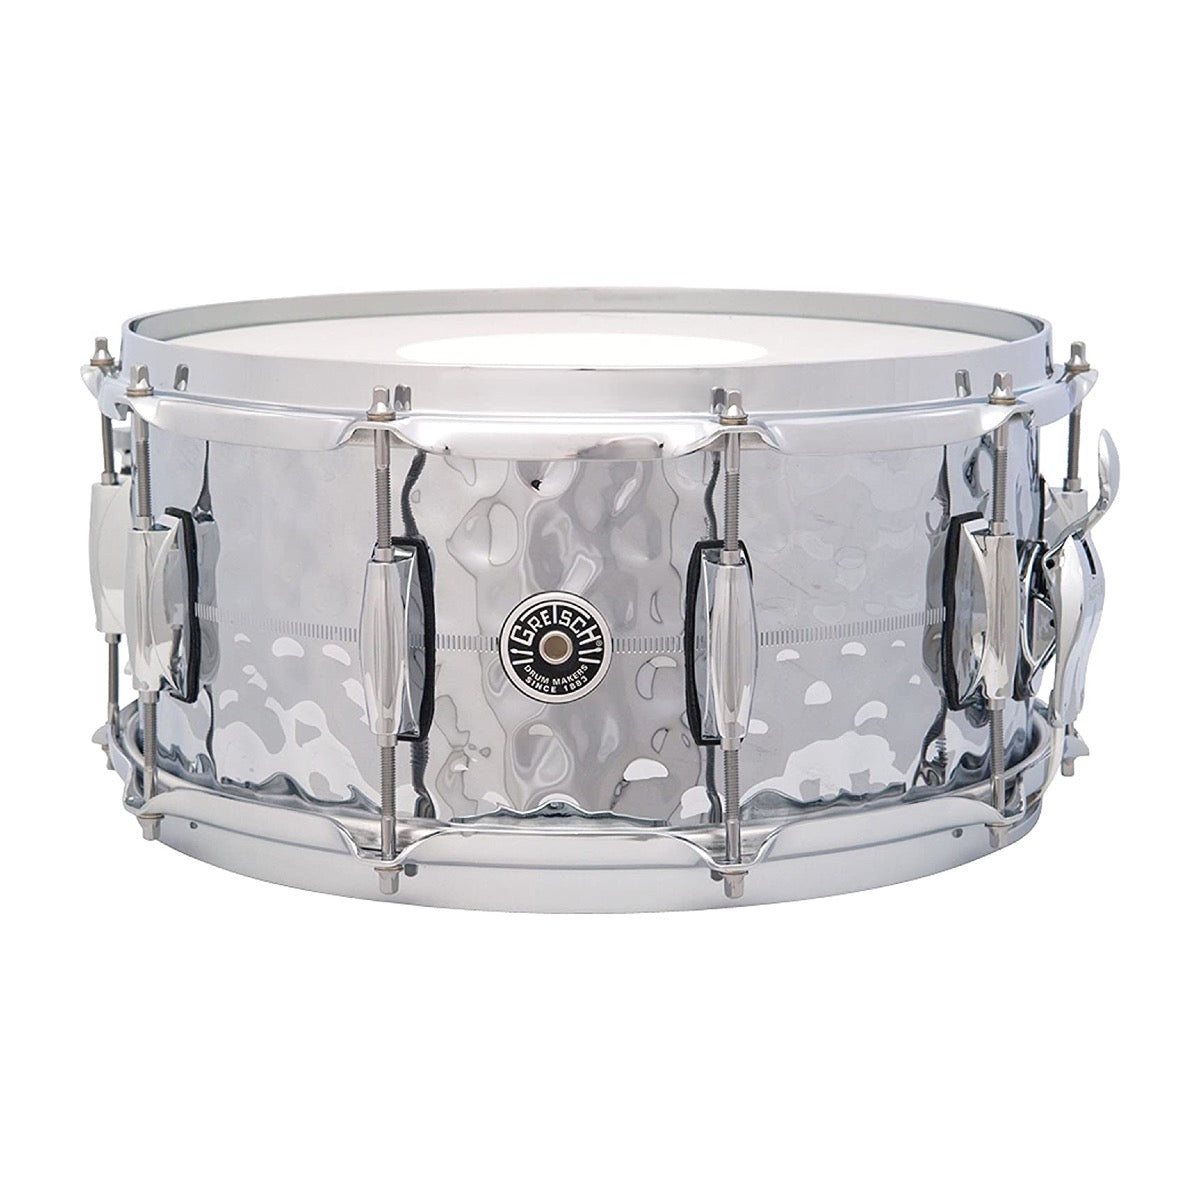 Brooklyn　Series　Over　B　Music　Snare　Alto　6.5x14　GB4164HB　Chrome　–　Gretsch　Hammered